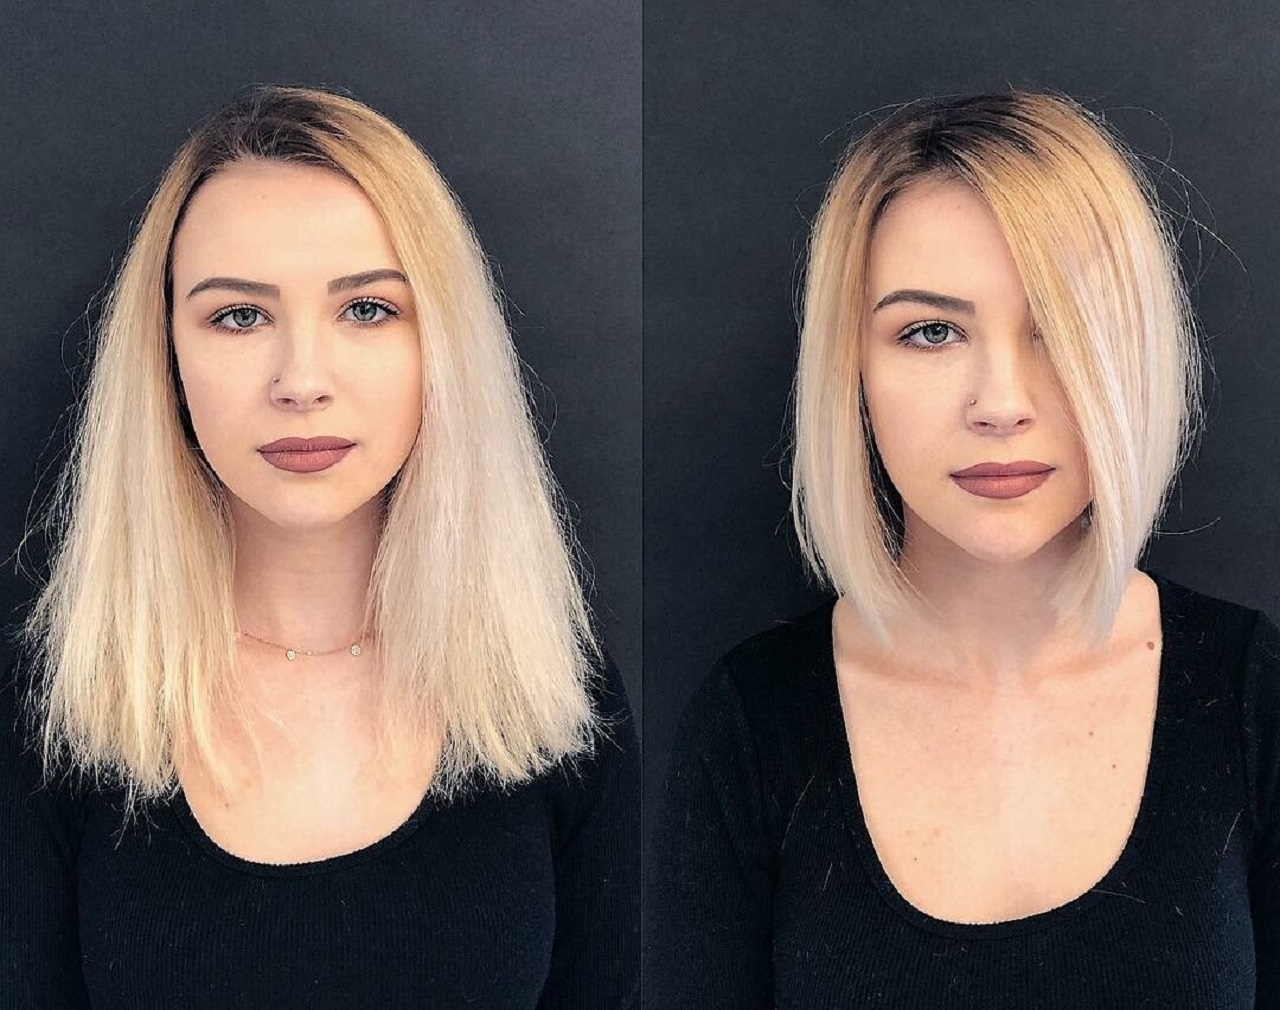 How change hair image - The Best Images for a Confident Woman